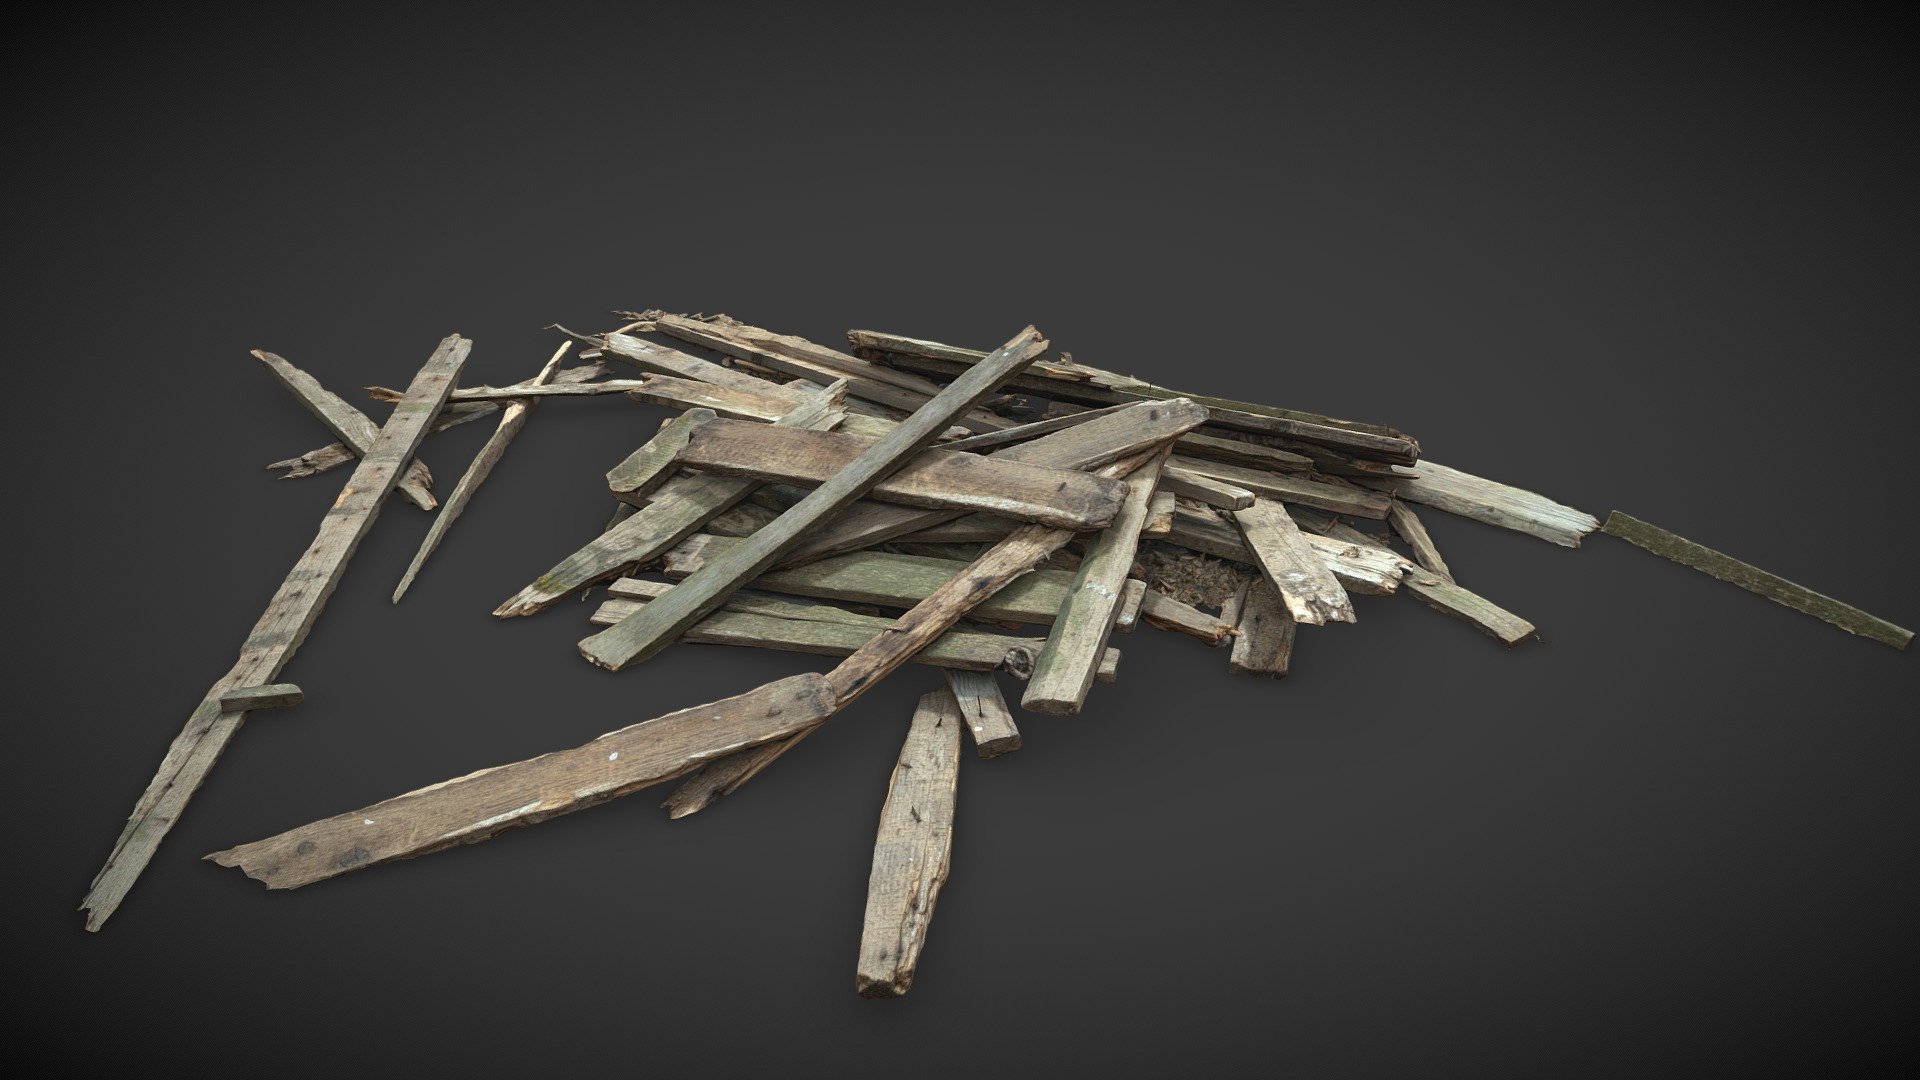 3D scan of old broken wooden planks, boards, pallets, chips on a pile

Reconstructed in RC from 207 DSLR images.

8K texture and diffuse - Old wooden planks - Buy Royalty Free 3D model by Goromor (@gorllu) 3d model